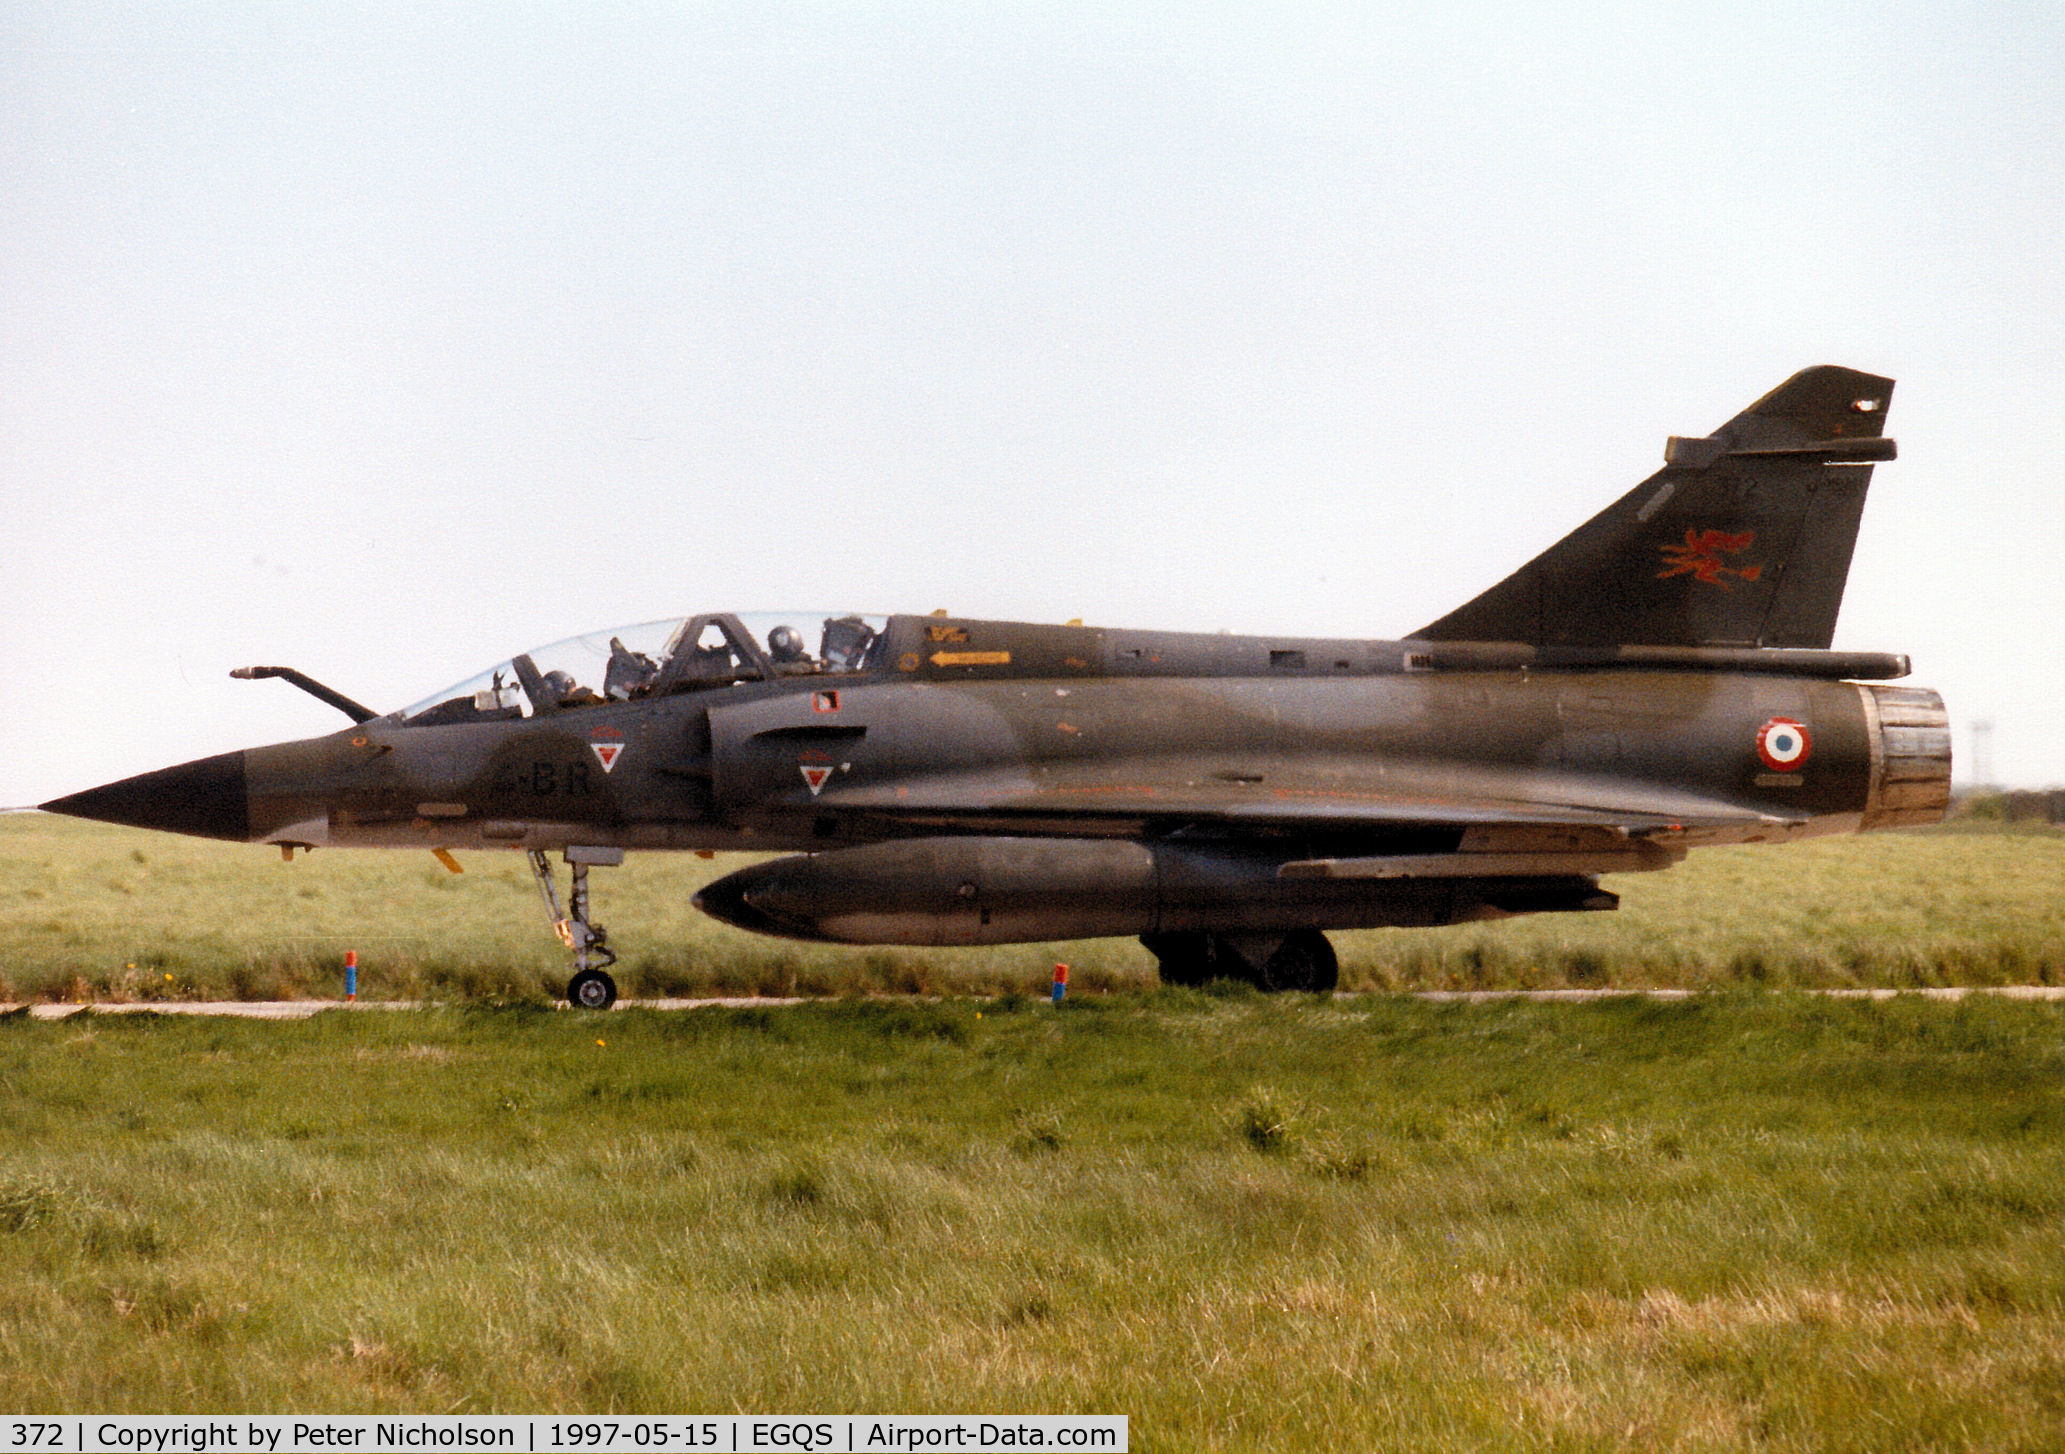 372, Dassault Mirage 2000N C/N 386, Mirage 2000N, callsign French Air Force 4210 Bravo, of EC 02.004 taxying to the active runway at RAF Lossiemouth in the Summer of 1997.